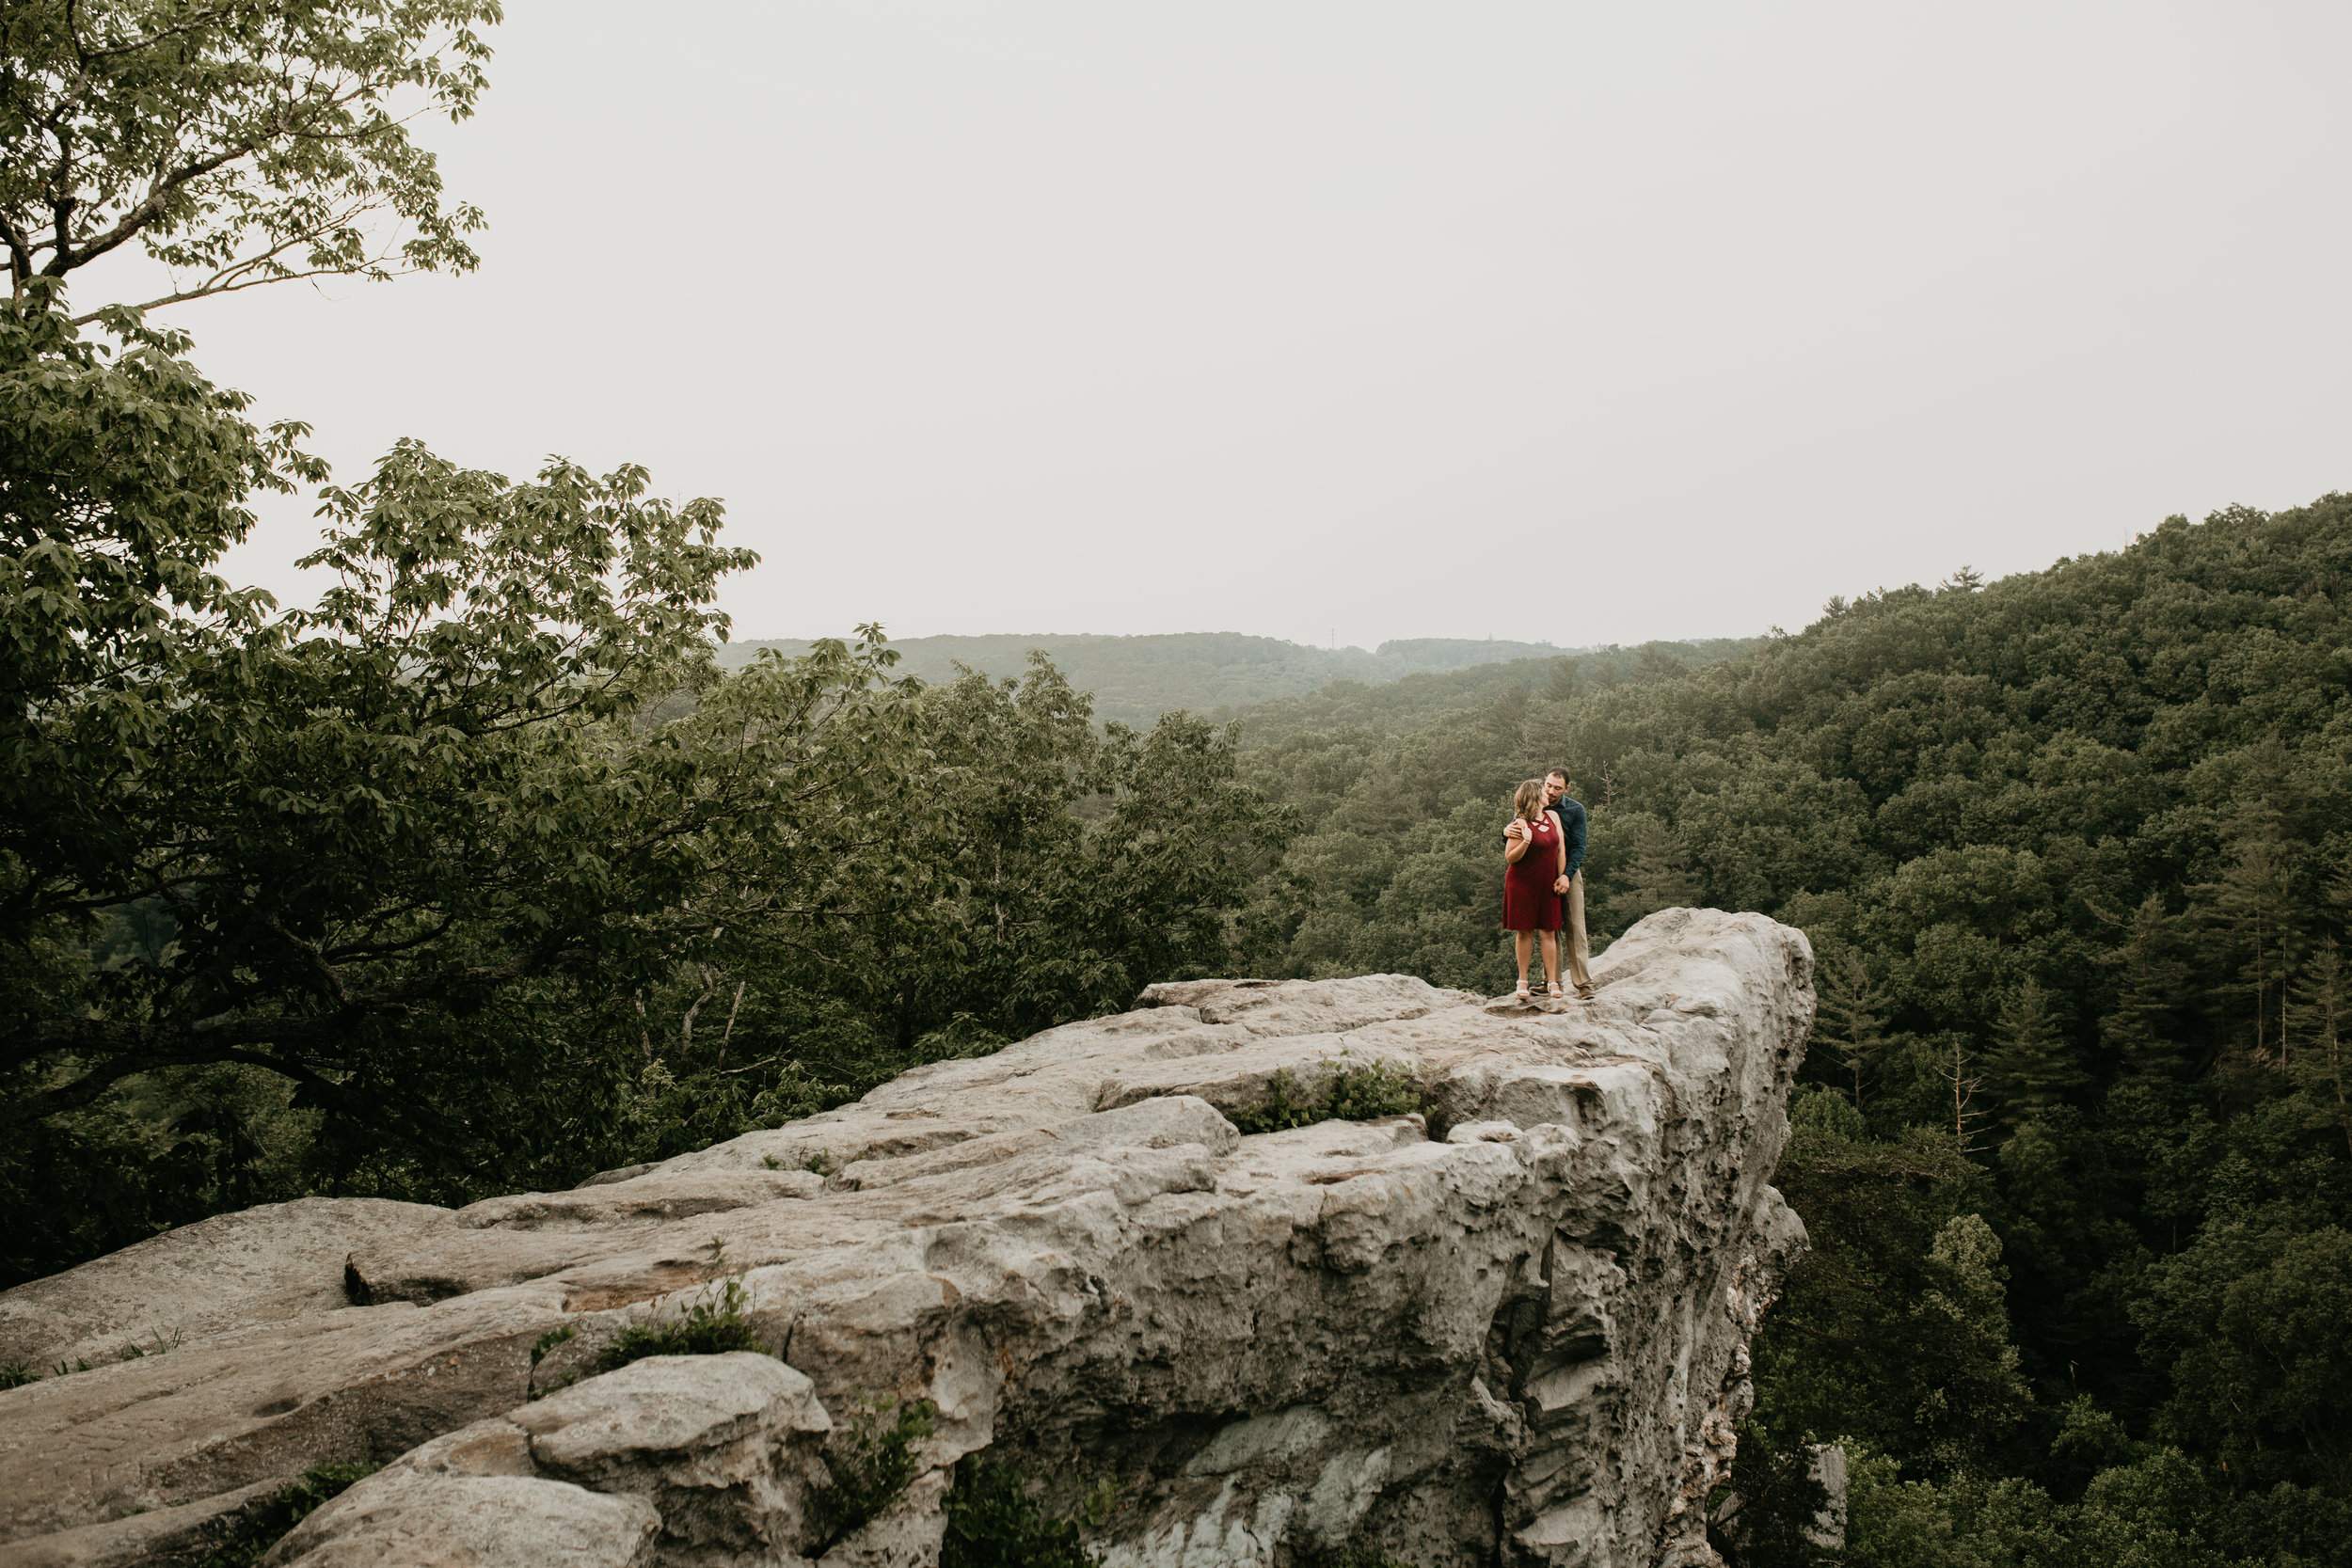 Nicole-Daacke-Photography-rock-state-park-overlook-king-queen-seat-maryland-hiking-adventure-engagement-session-photos-portraits-summer-bel-air-dog-engagement-session-25.jpg